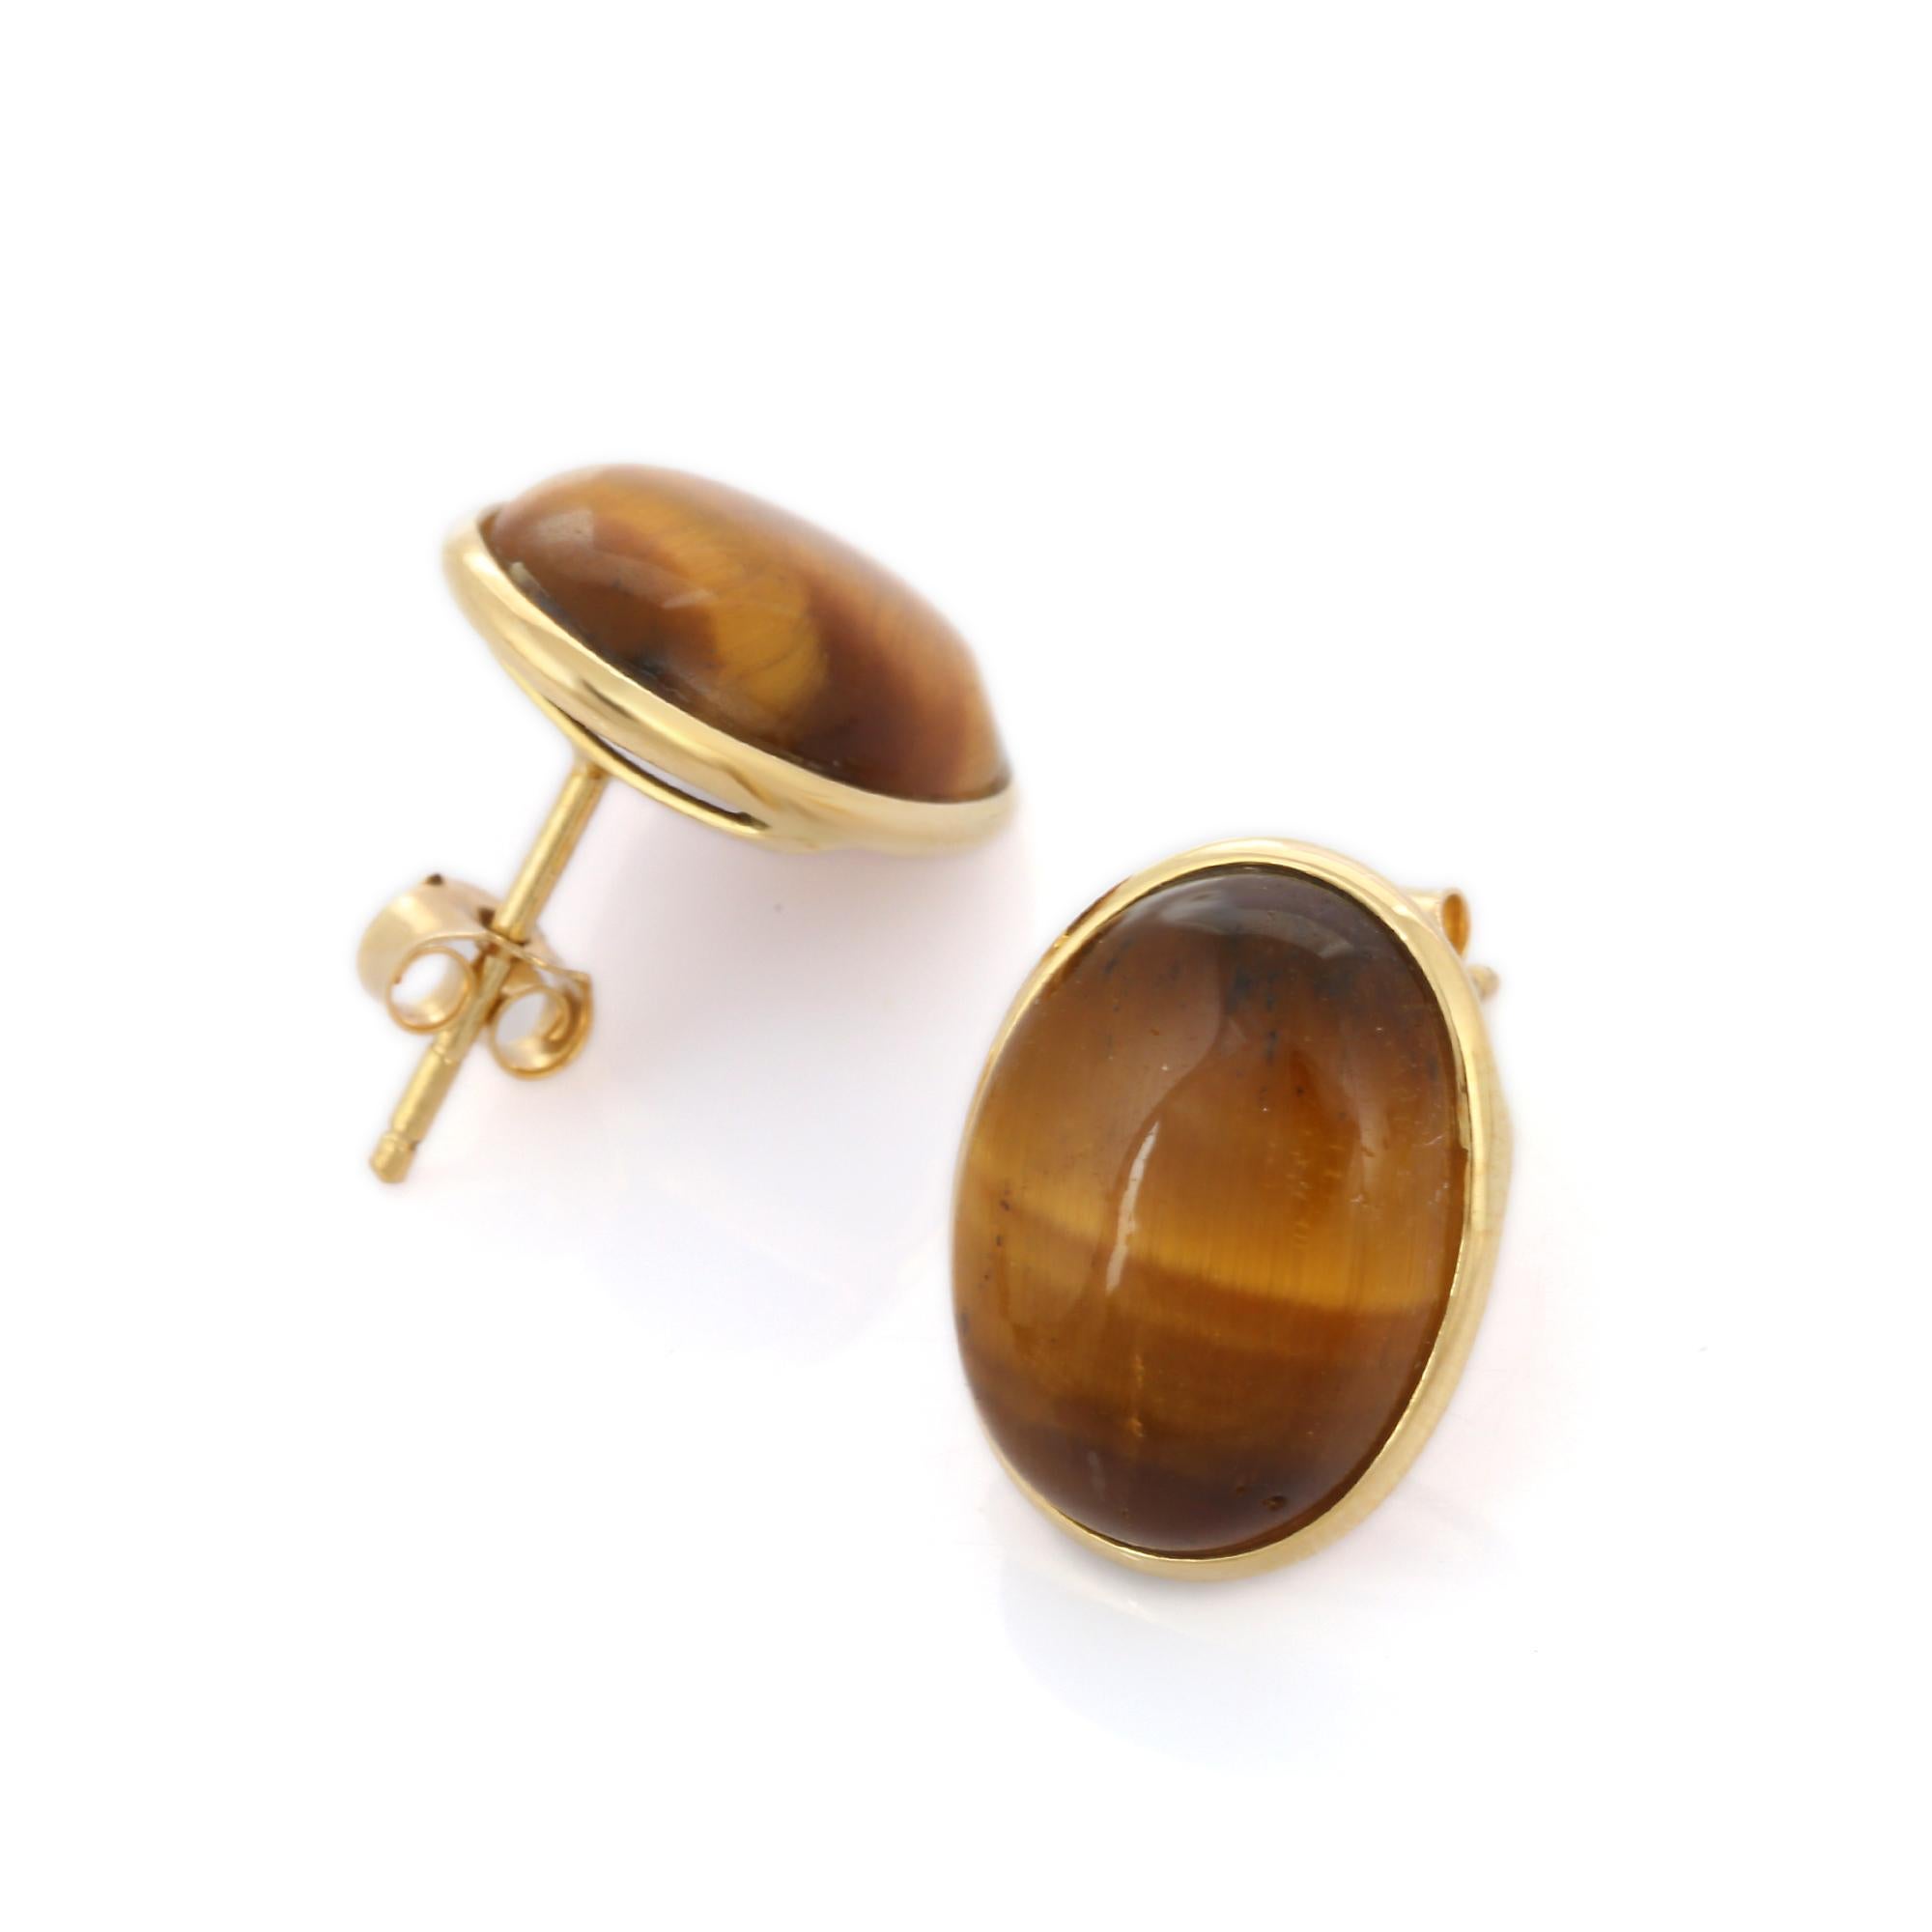 Studs create a subtle beauty while showcasing the colors of the natural precious gemstones making a statement. 
Cabochon oval cut tiger's eye stud earrings in 18K gold. Embrace your look with these stunning pair of earrings suitable for any occasion